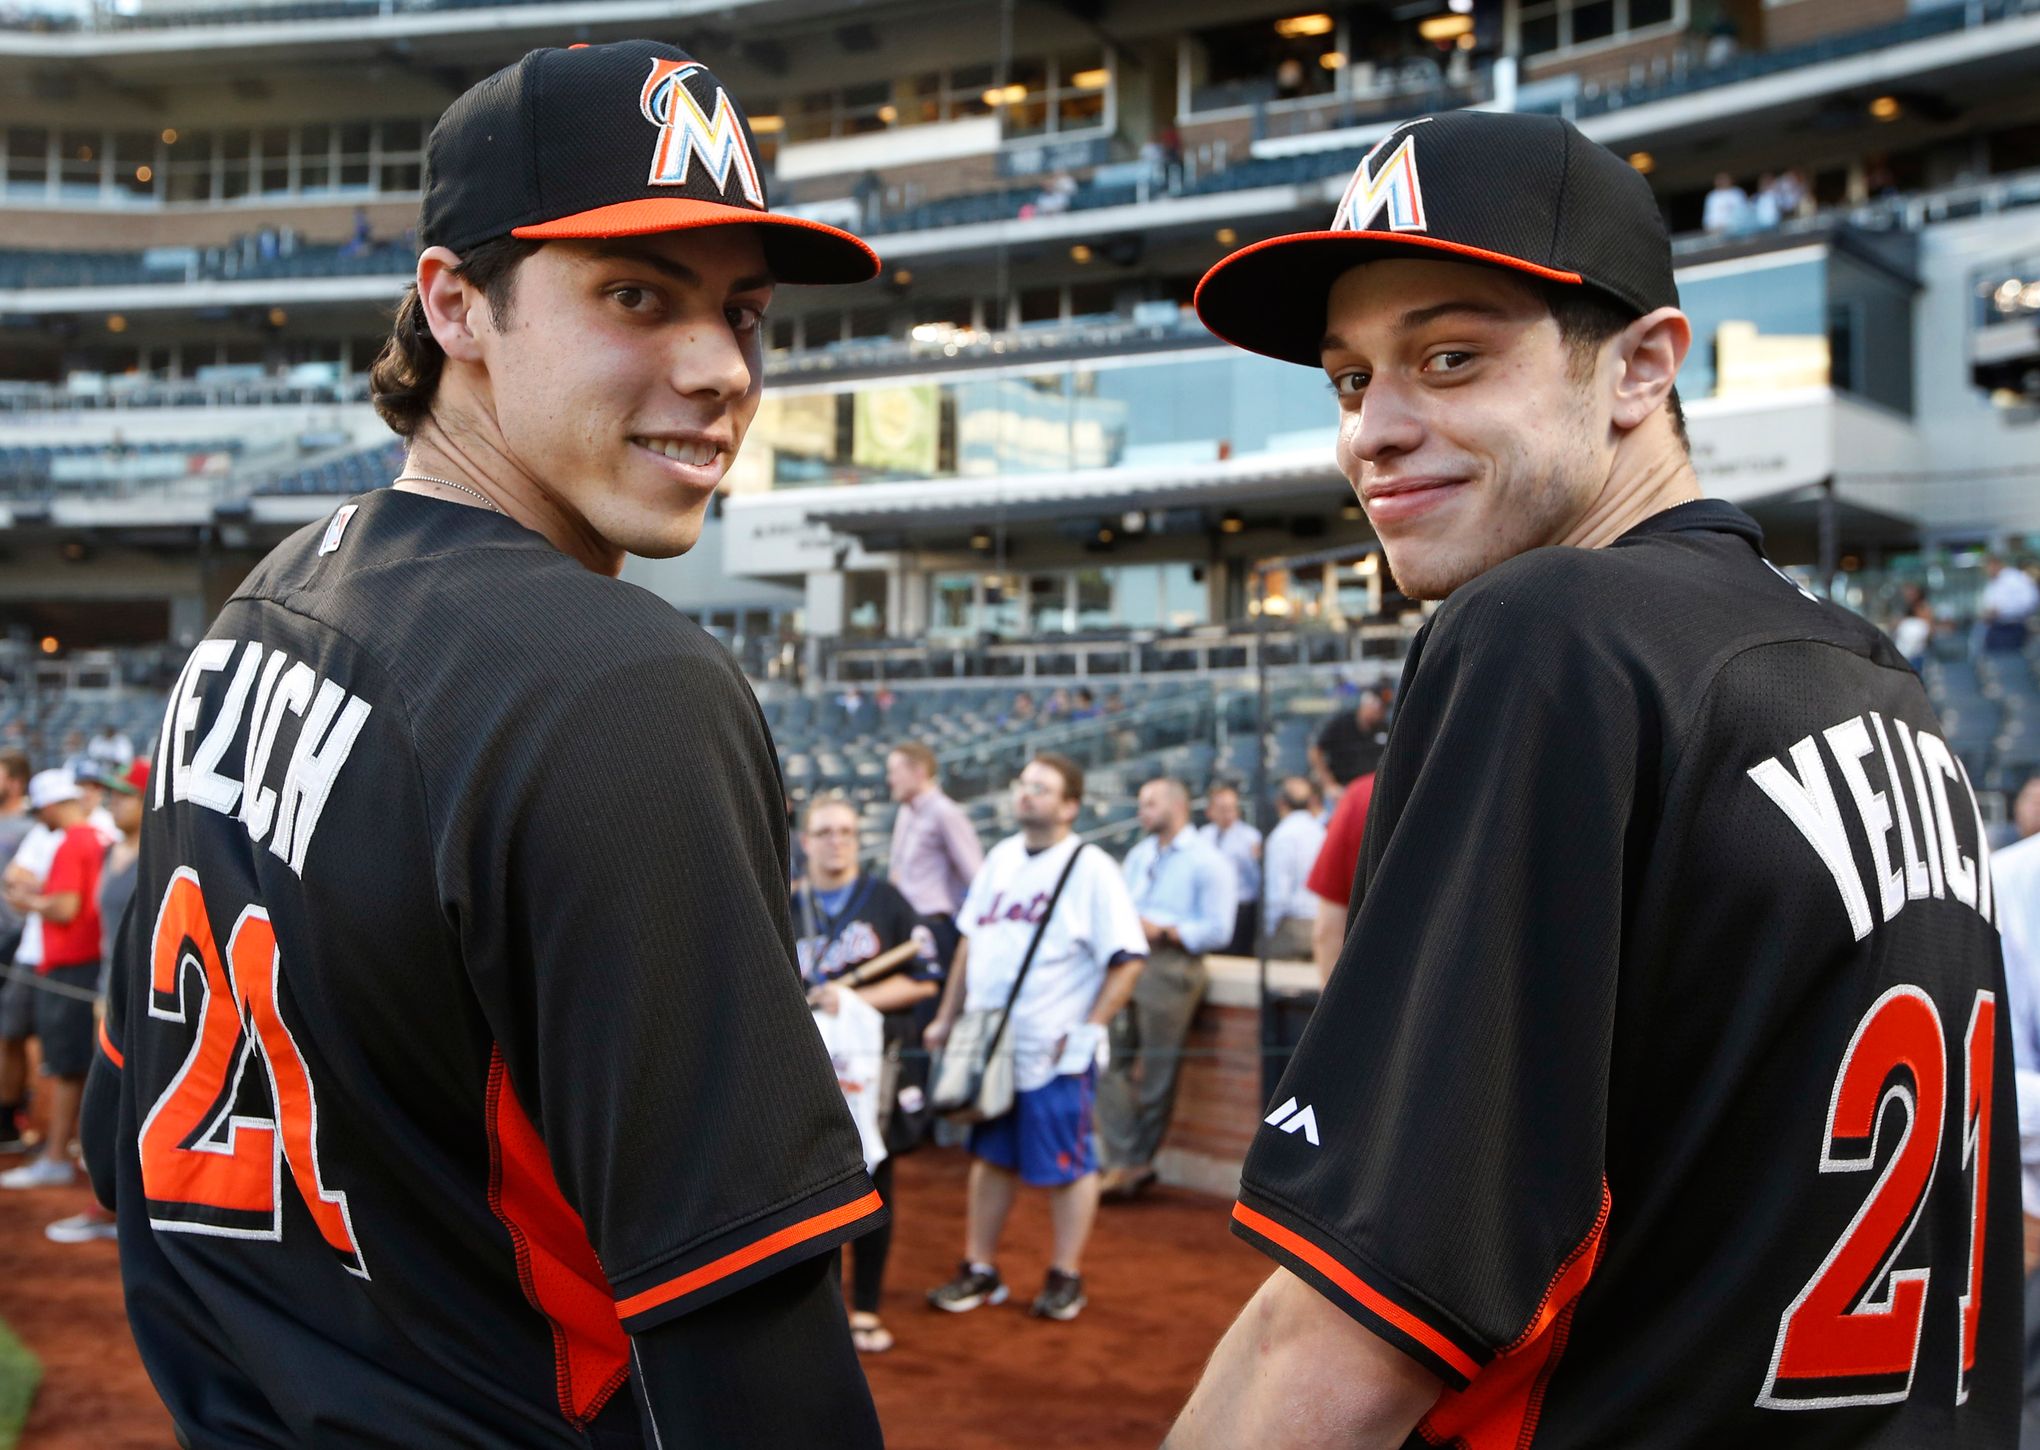 Marlins surprise Christian Yelich with lookalike from 'SNL